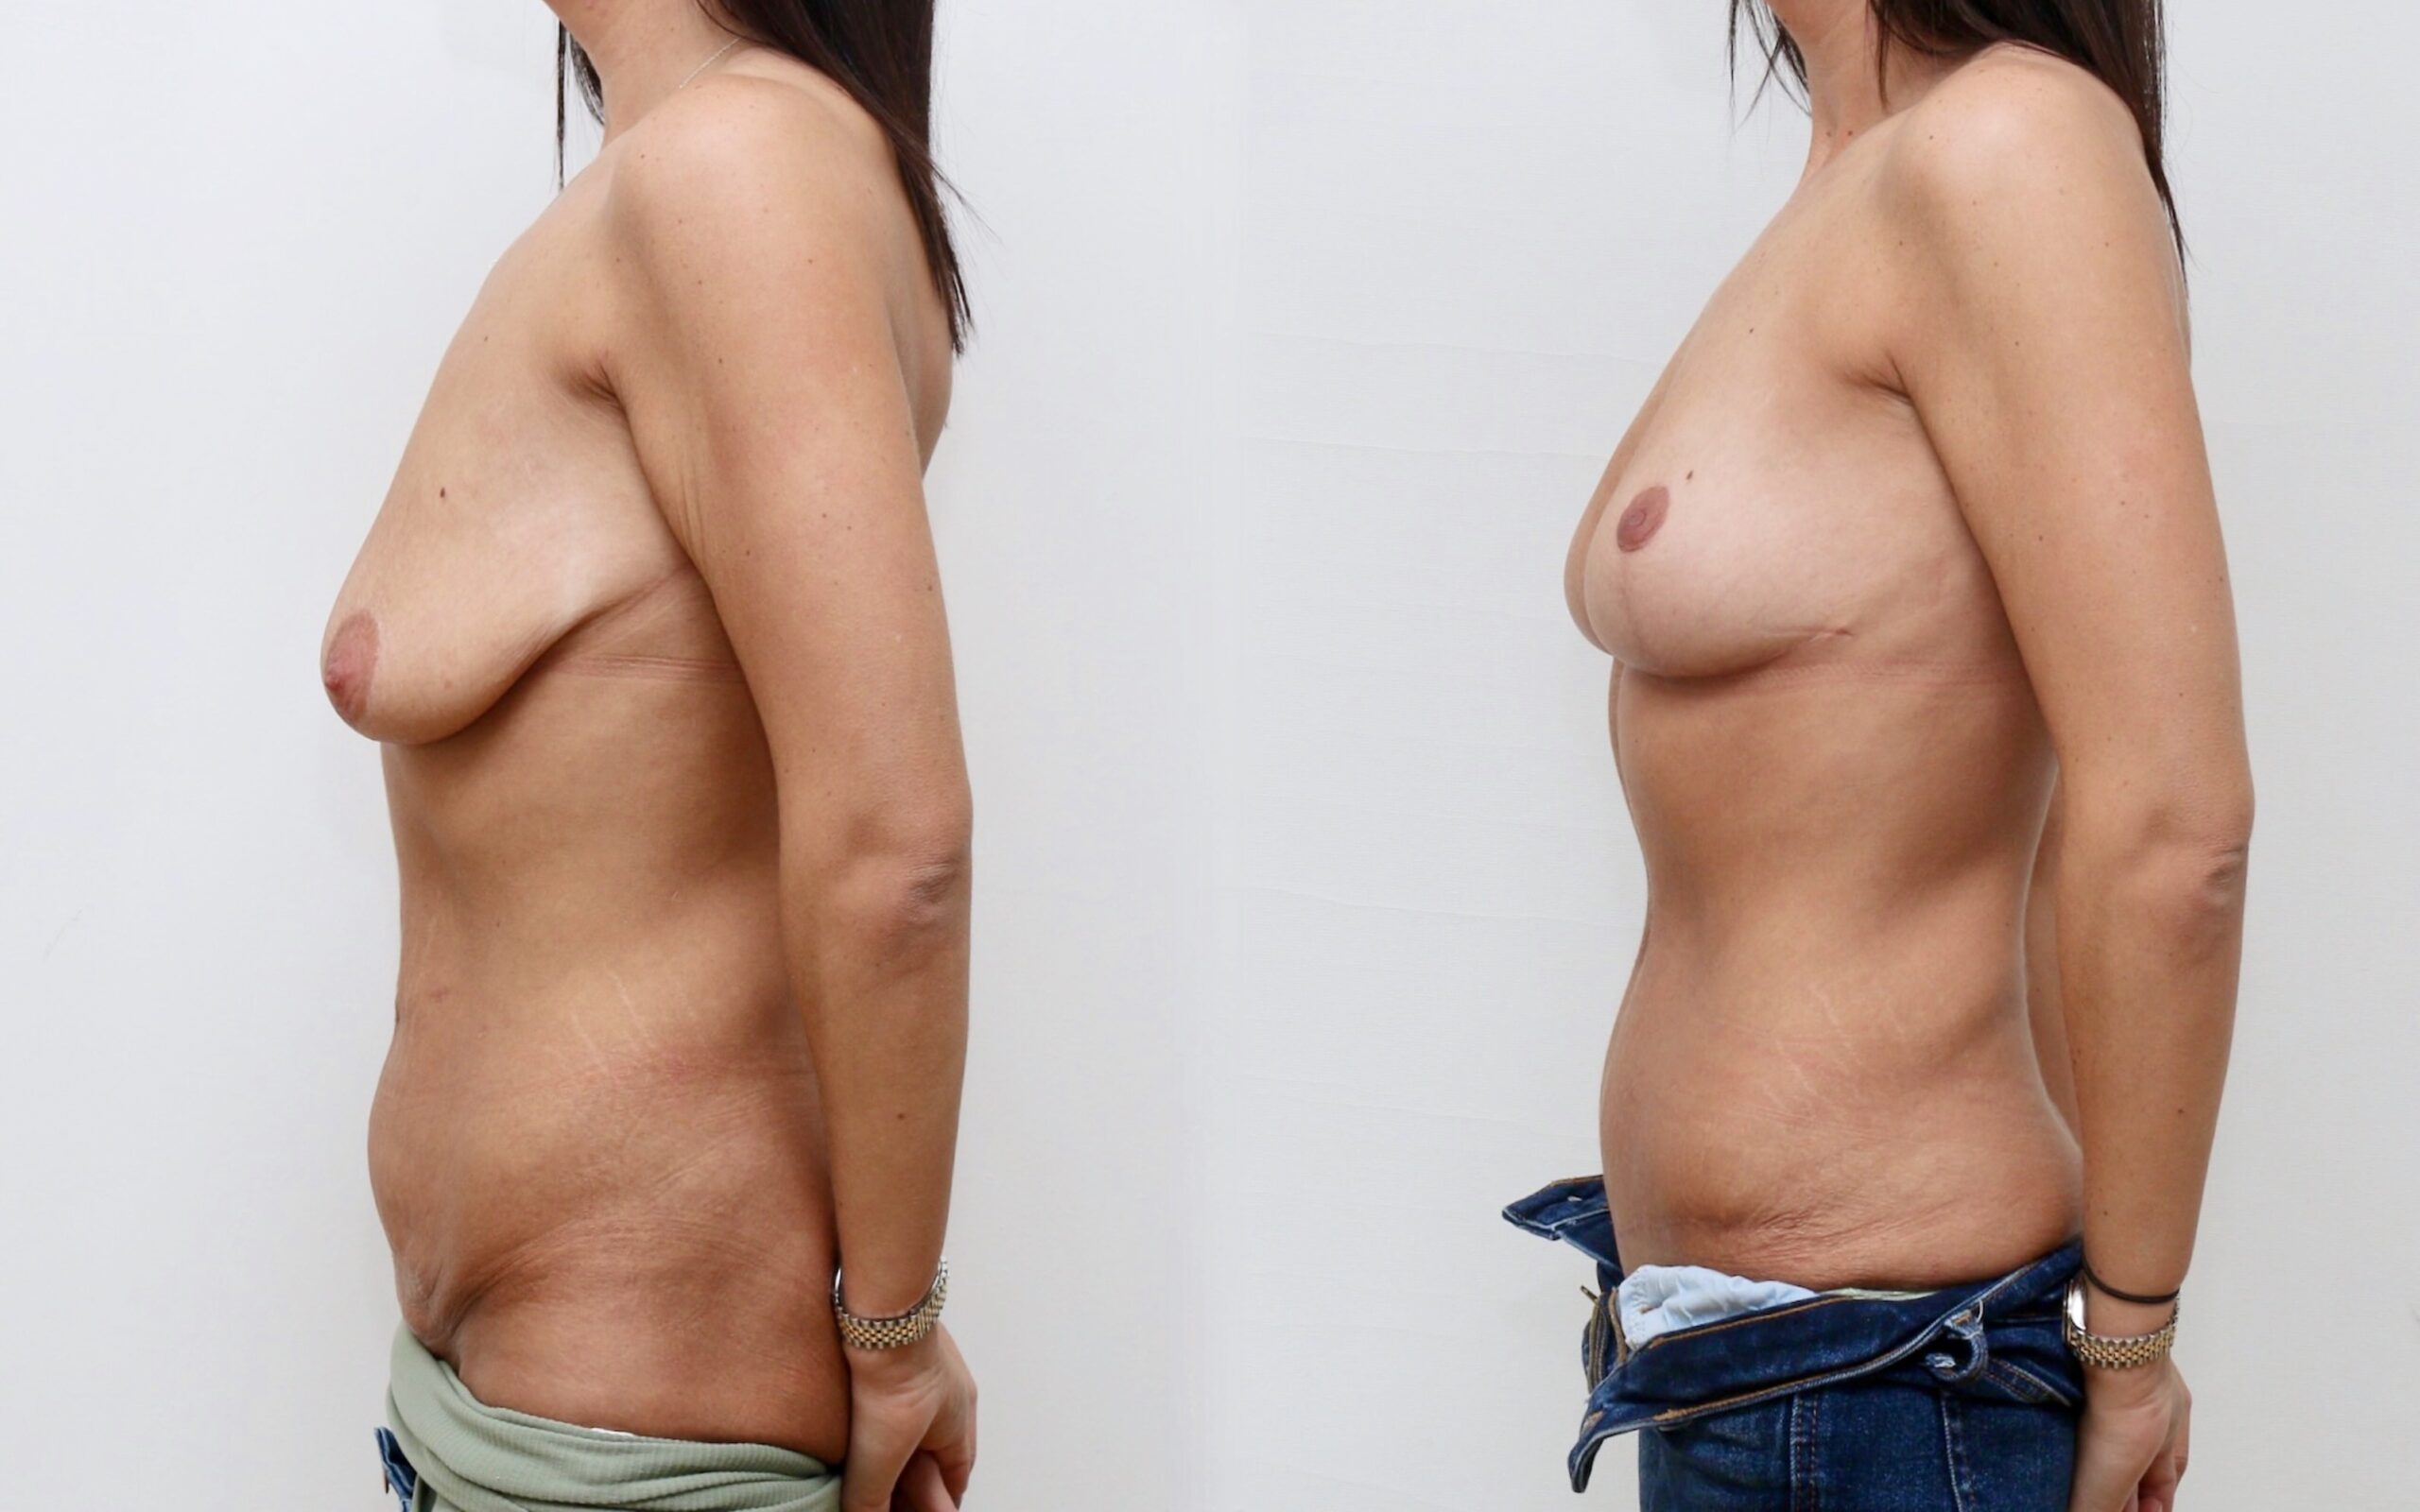 Mummy makeover /post weight loss tummy tuck